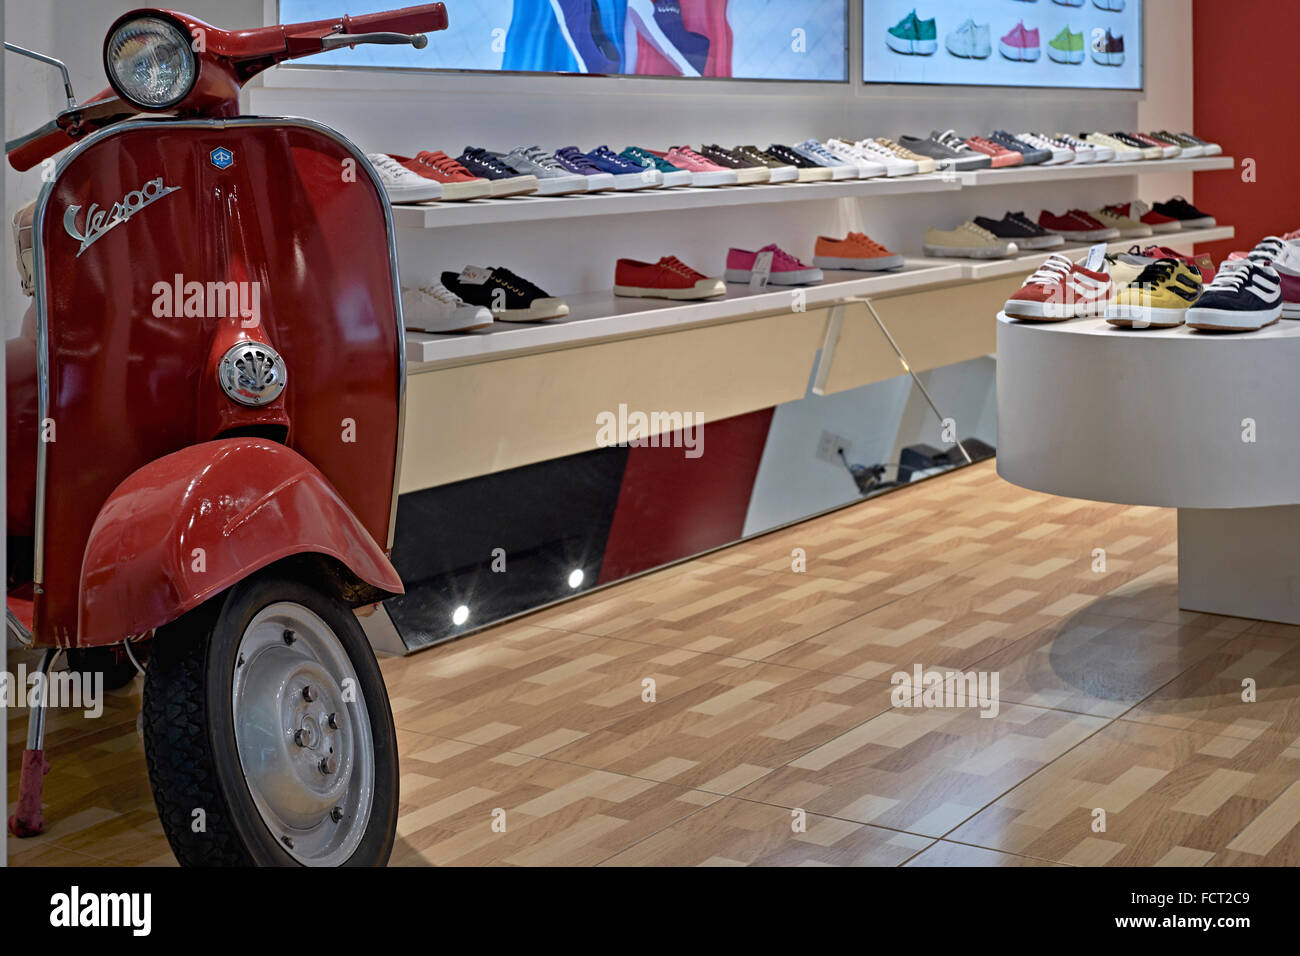 Vespa scooter. Shop selling Italian sneakers with appropriate Vespa scooter  display Stock Photo - Alamy